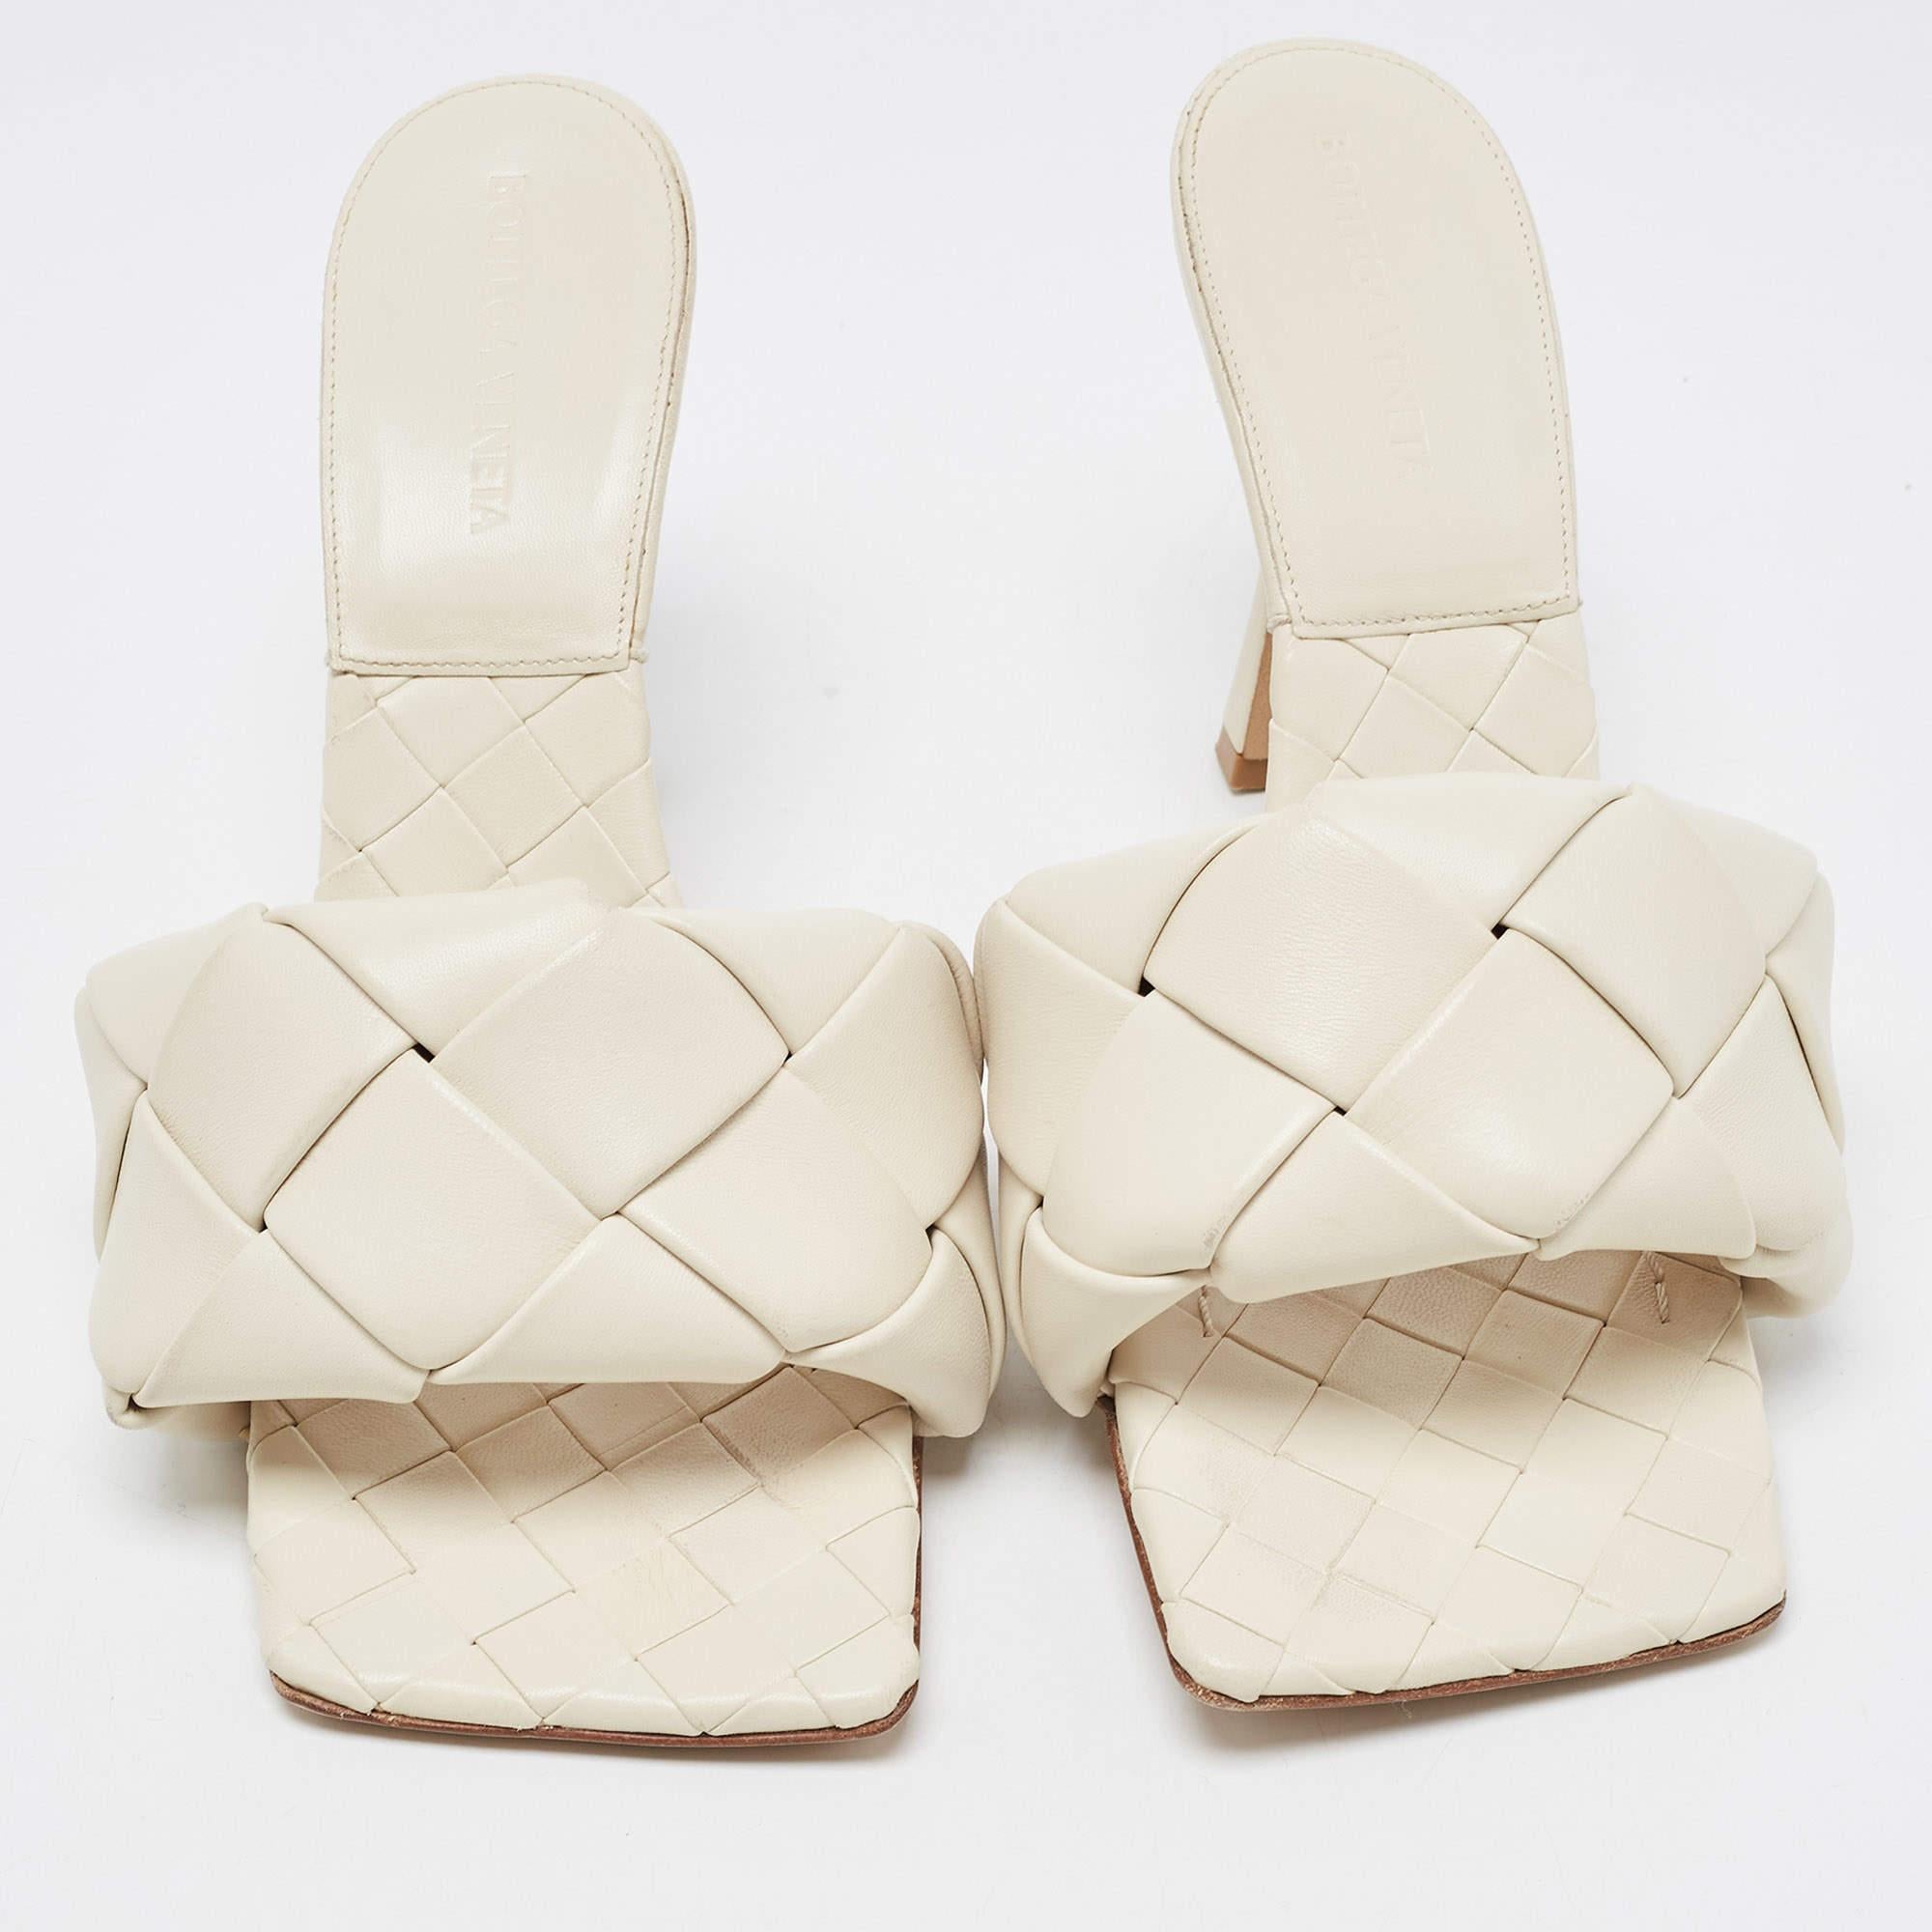 These timeless Bottega Veneta Lido slides in cream leather are meant to last you season after season. They have a comfortable fit and high-quality finish.

Includes
Original Dustbag